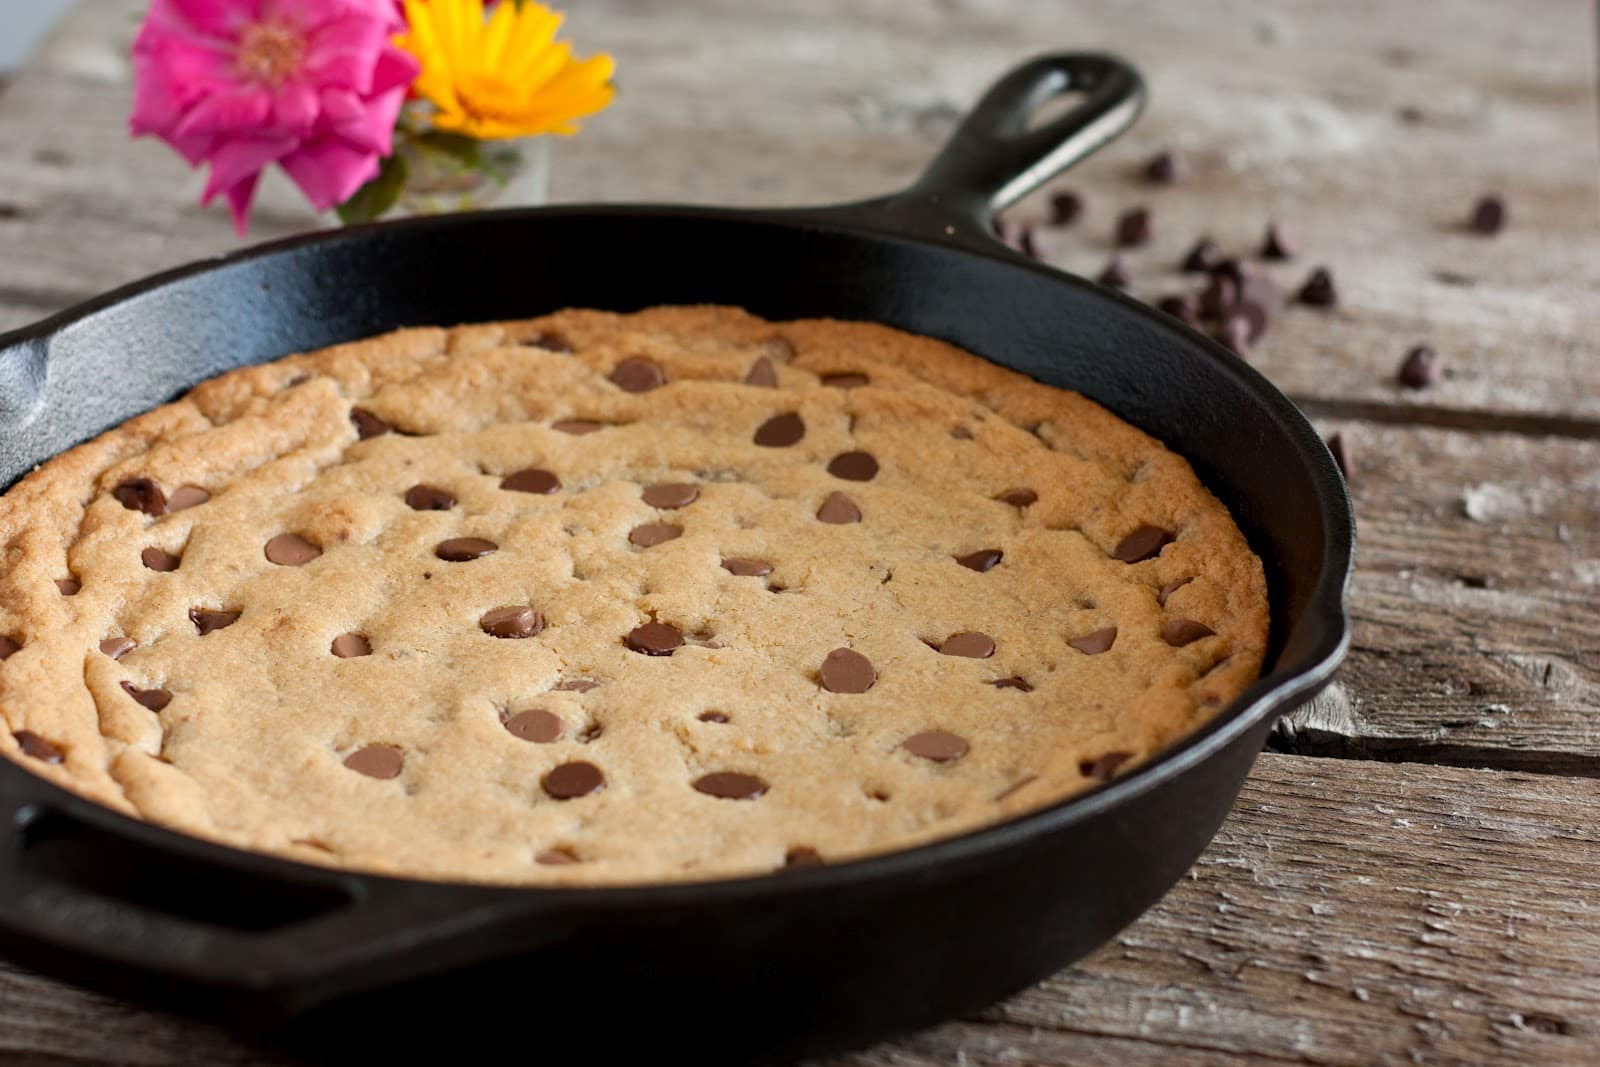 https://www.cookingclassy.com/wp-content/uploads/2012/11/chocolate+chip+skillet+cookie2.jpg